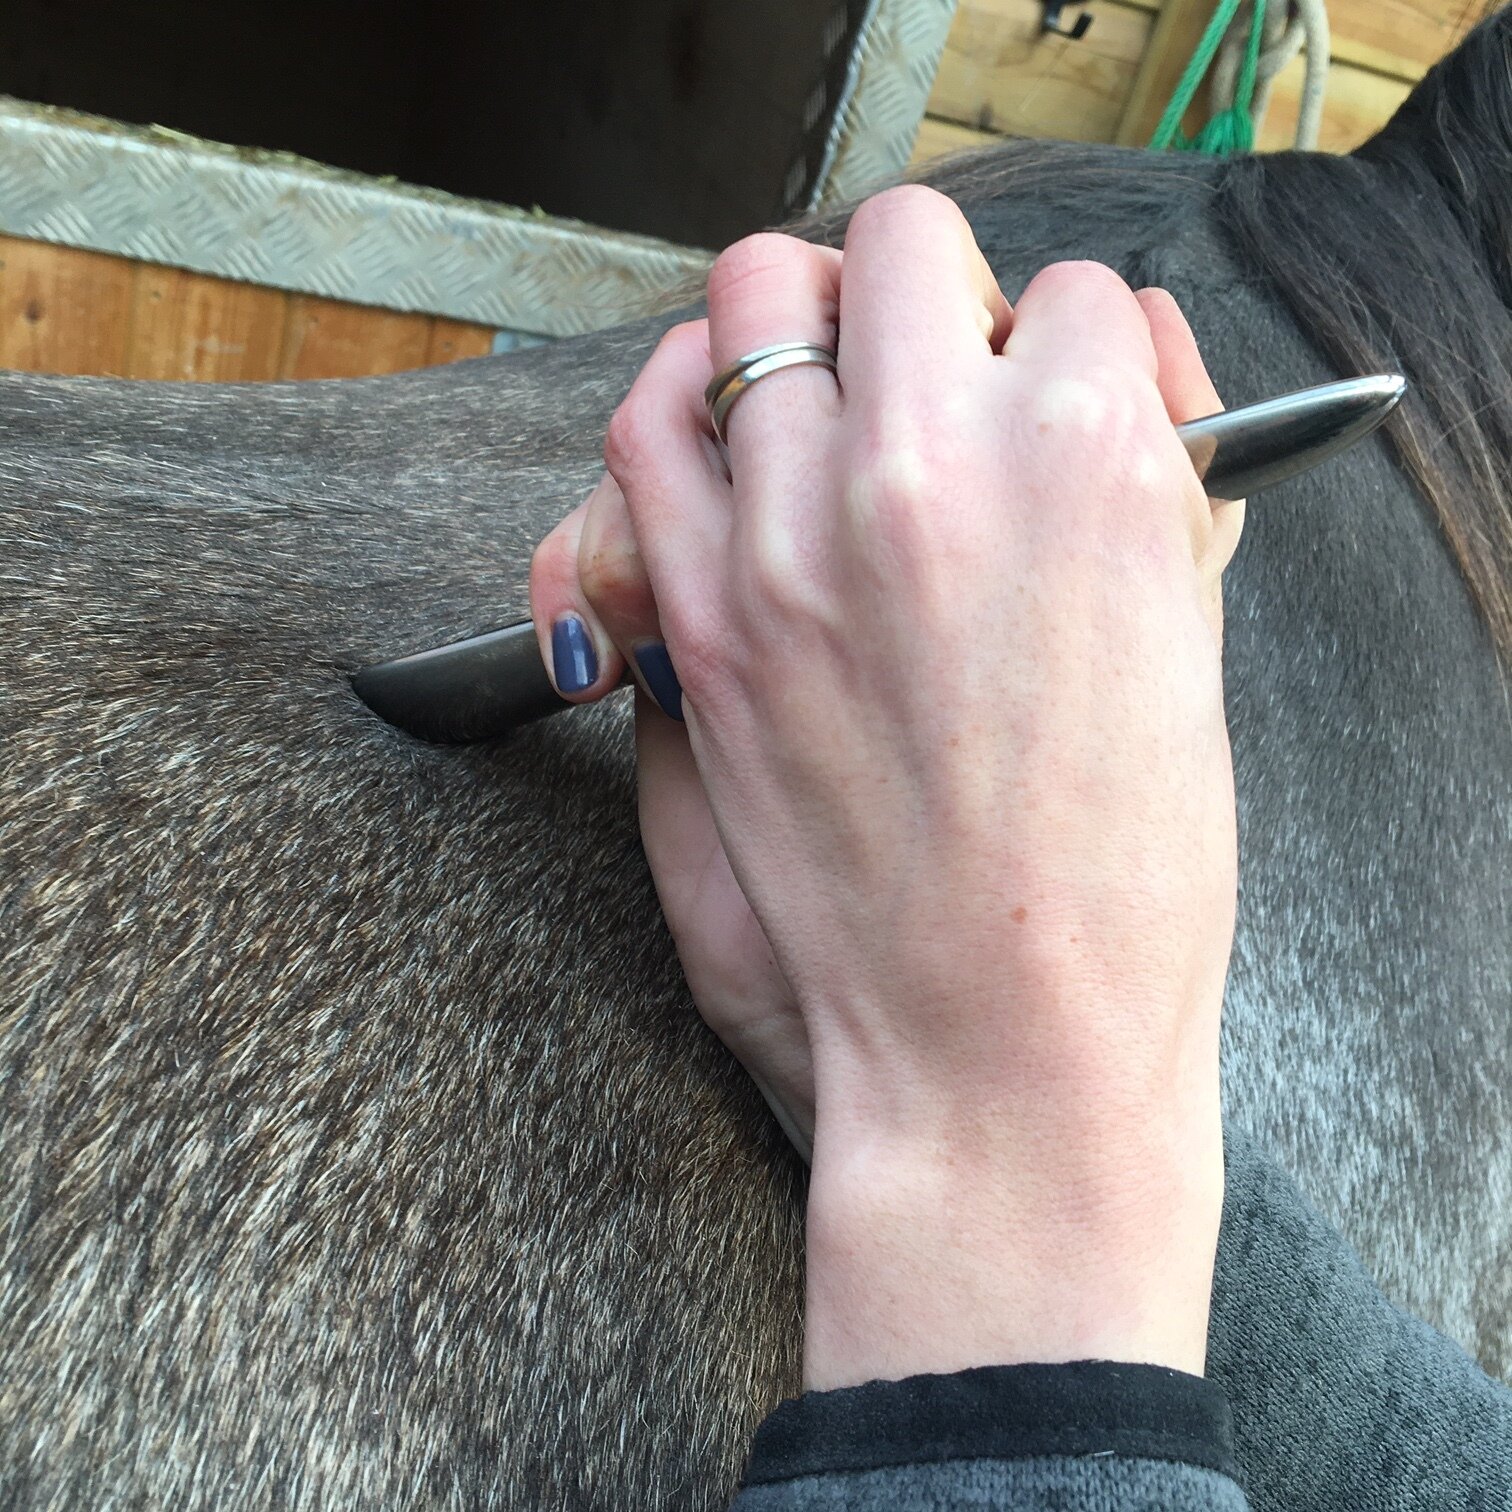 jessica_limpkin_equine_massage_therapy_therapist_myofascial_release_thefascialedge_fascial_edgeing.JPG